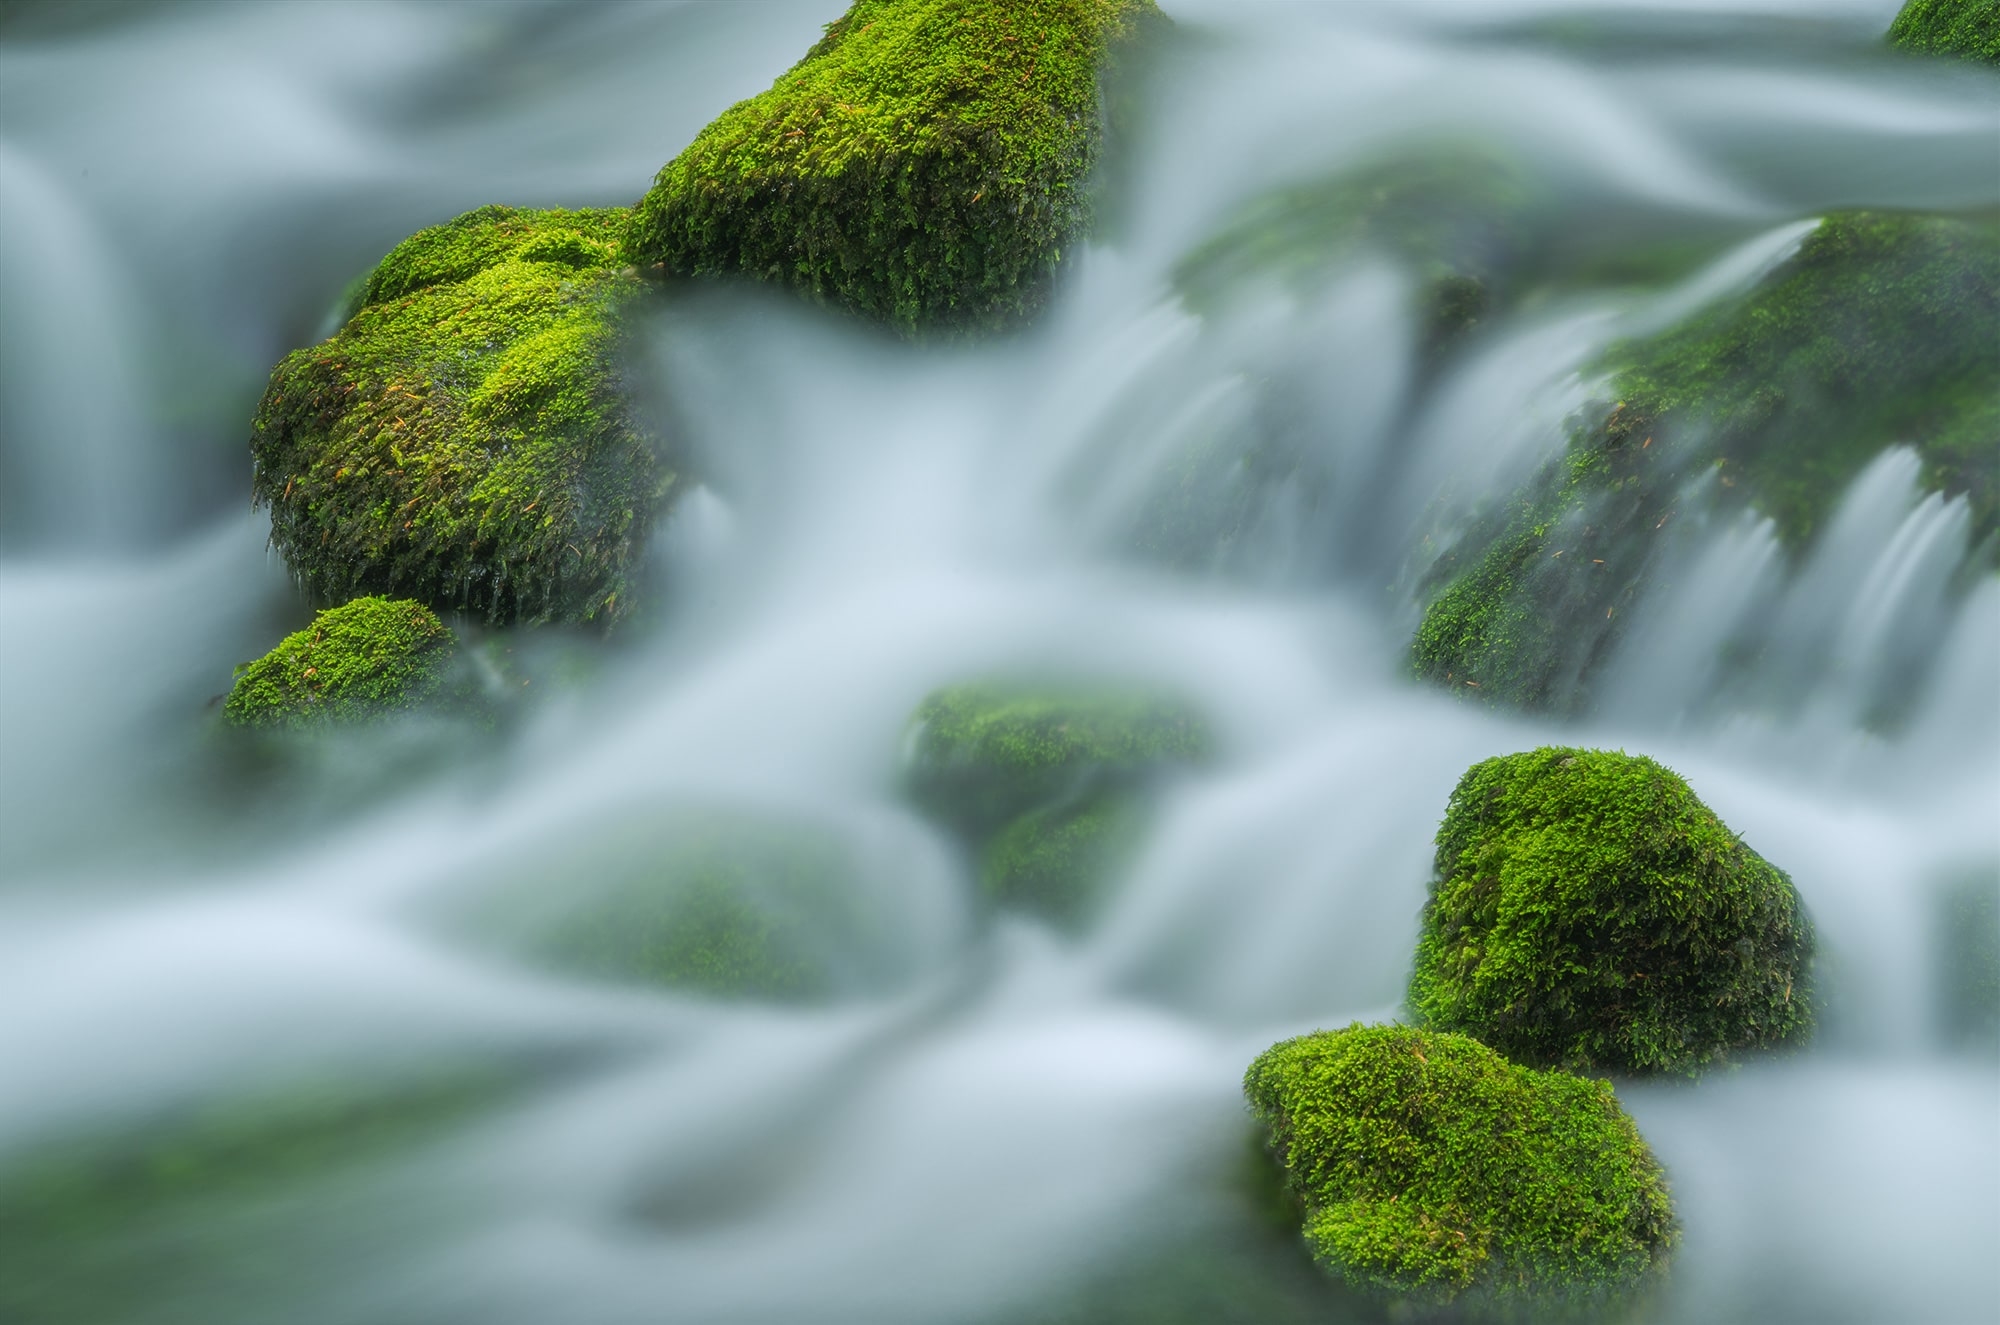 Captivating long exposure river photography of moss-covered rocks in Vallorbe, Switzerland. The ethereal ambiance gives the scene a fairytale-like appearance. Taken with a Nikon Z8, this image captures the tranquil beauty of nature in motion.